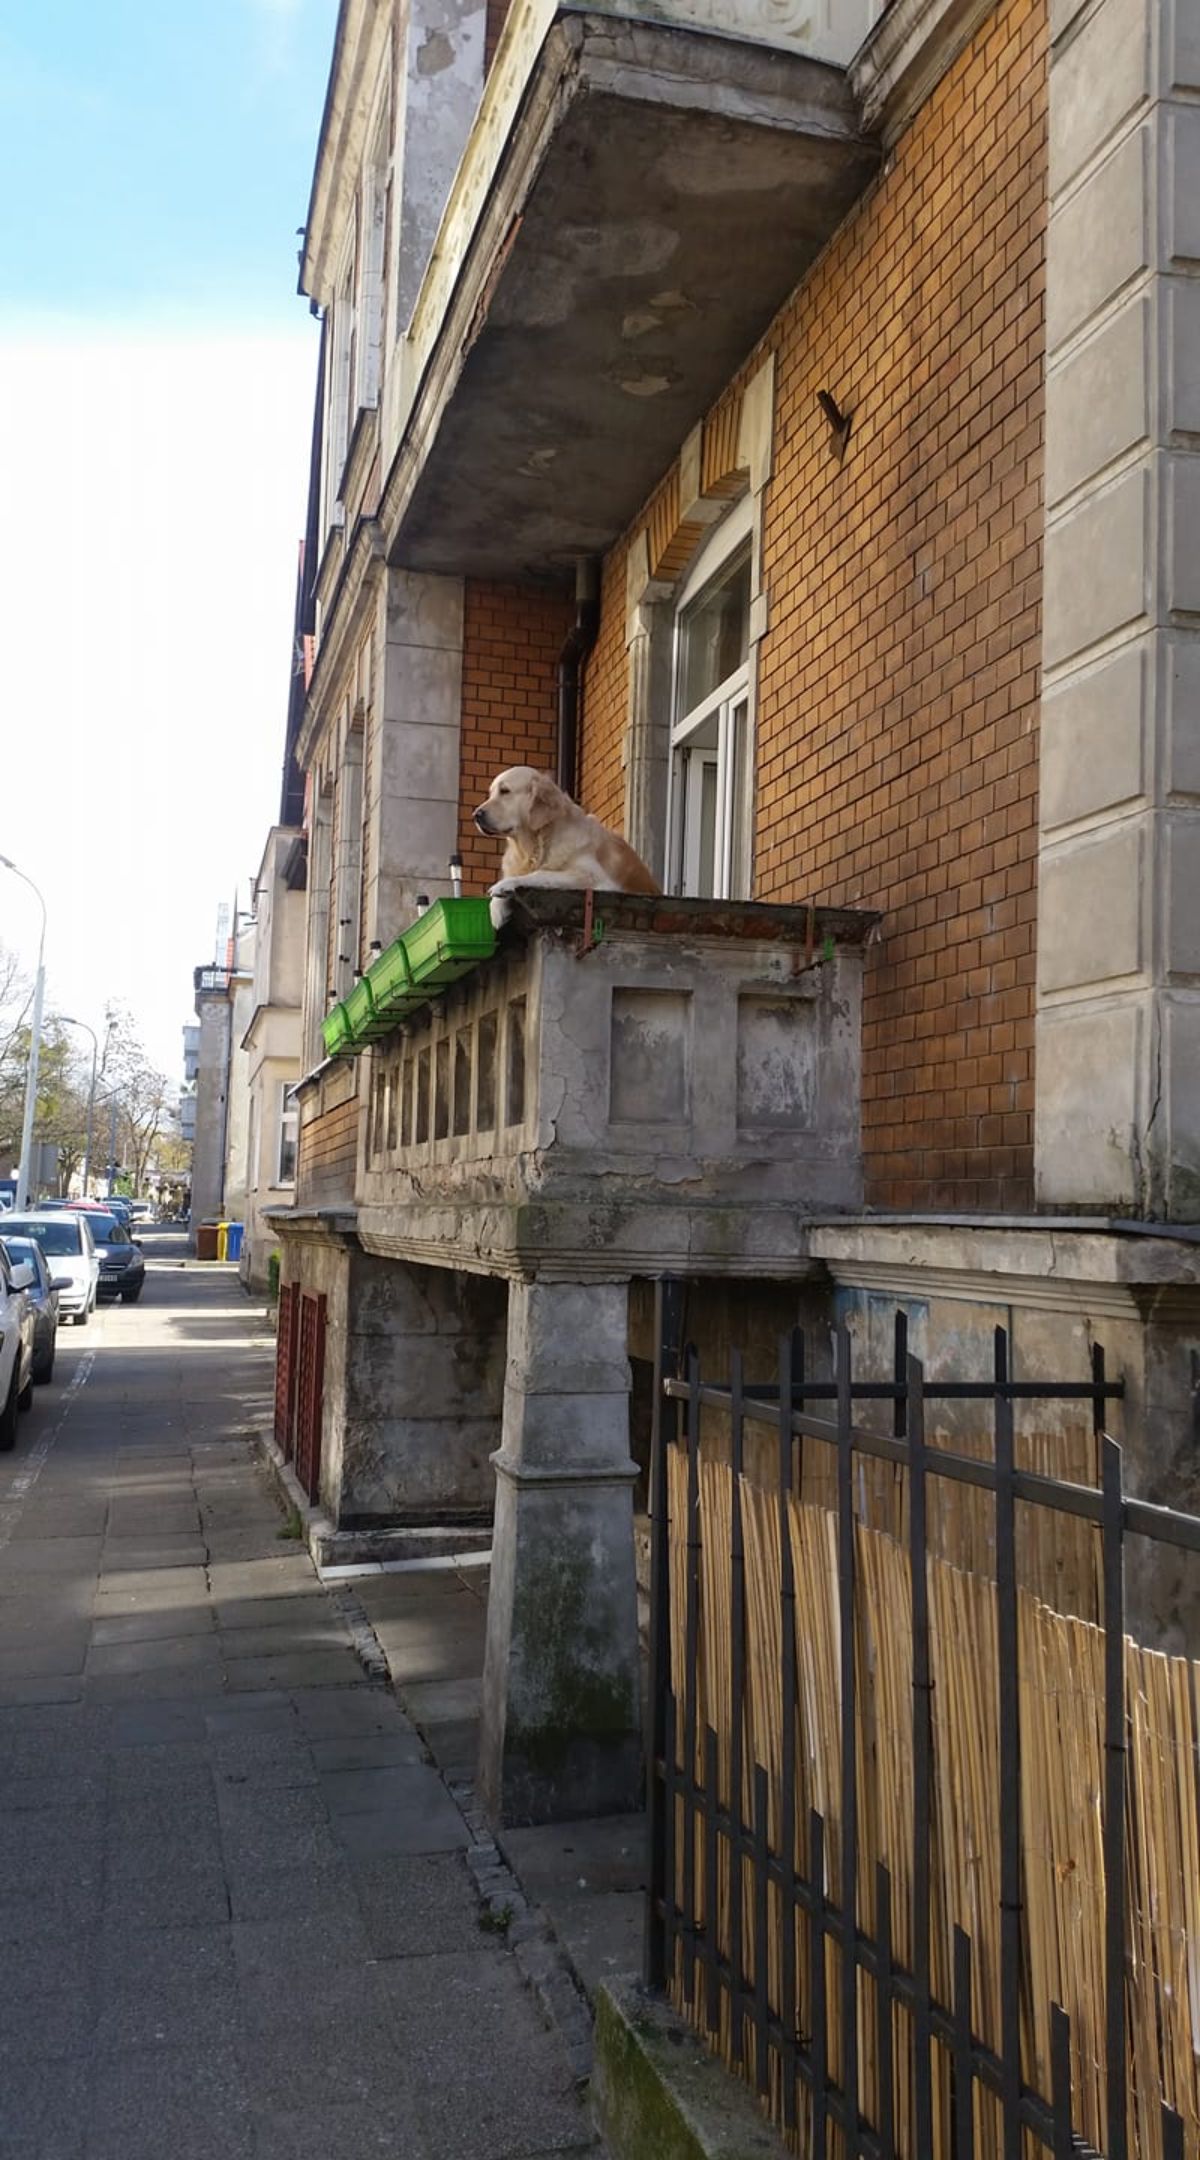 golden retriever looking into the distance hanging over a balcony with green flower pots